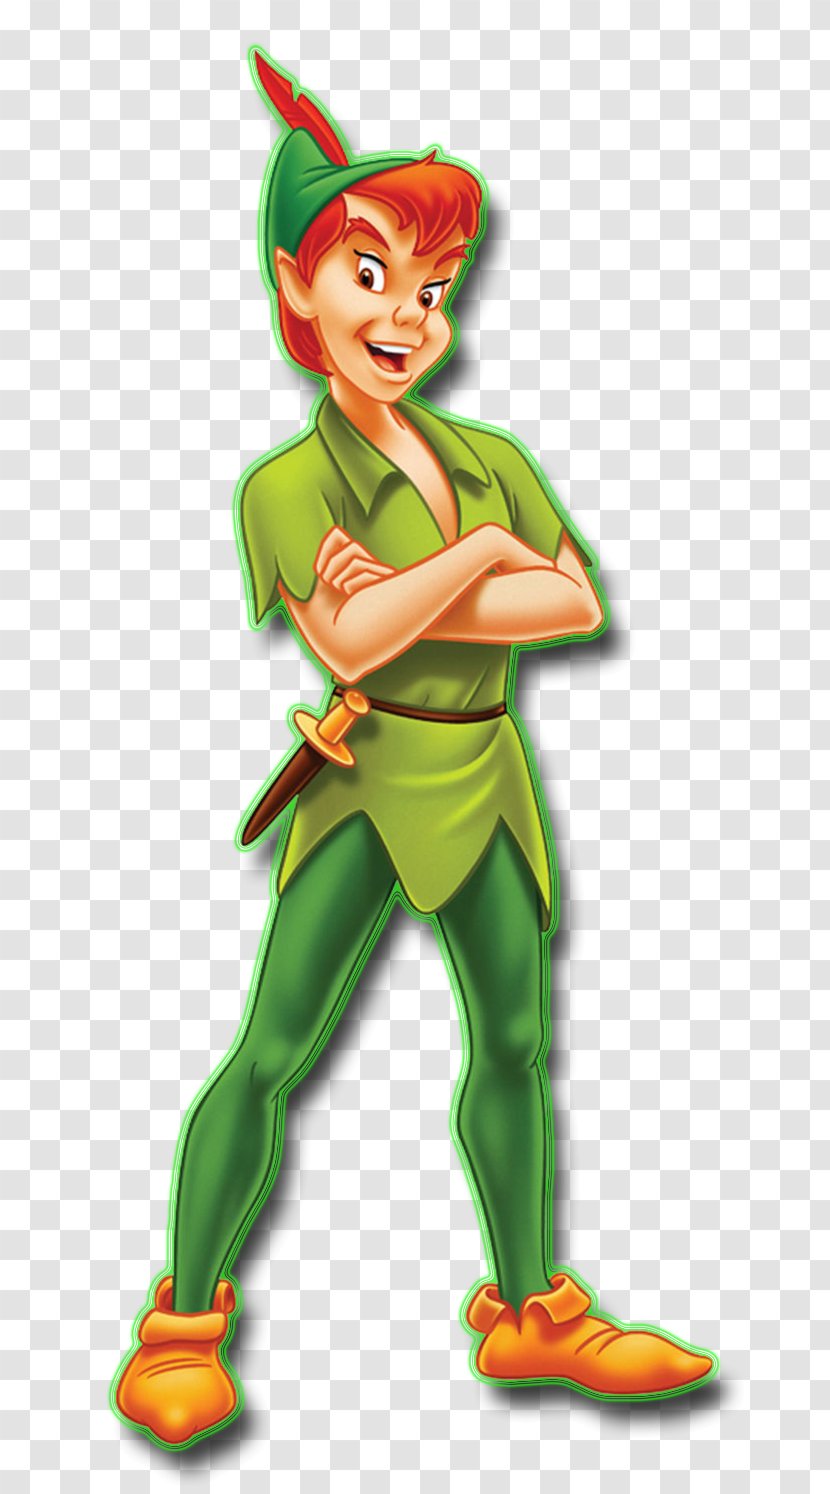 Peter Pan Film Cardboard Cut-Outs Neverland Ranch The Walt Disney Company Transparent PNG